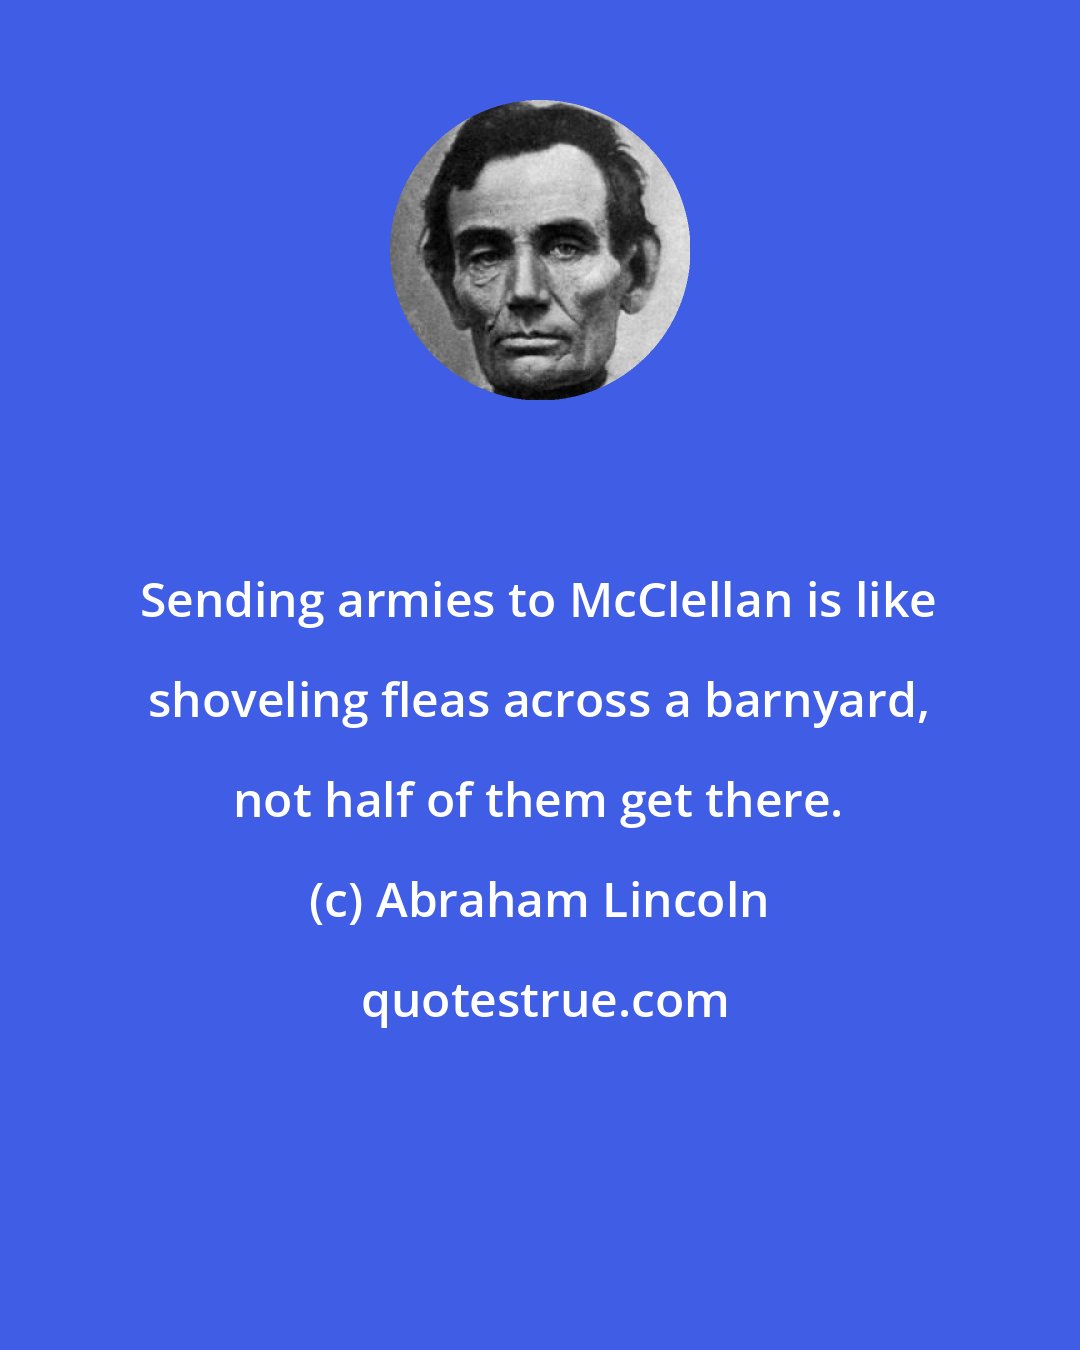 Abraham Lincoln: Sending armies to McClellan is like shoveling fleas across a barnyard, not half of them get there.